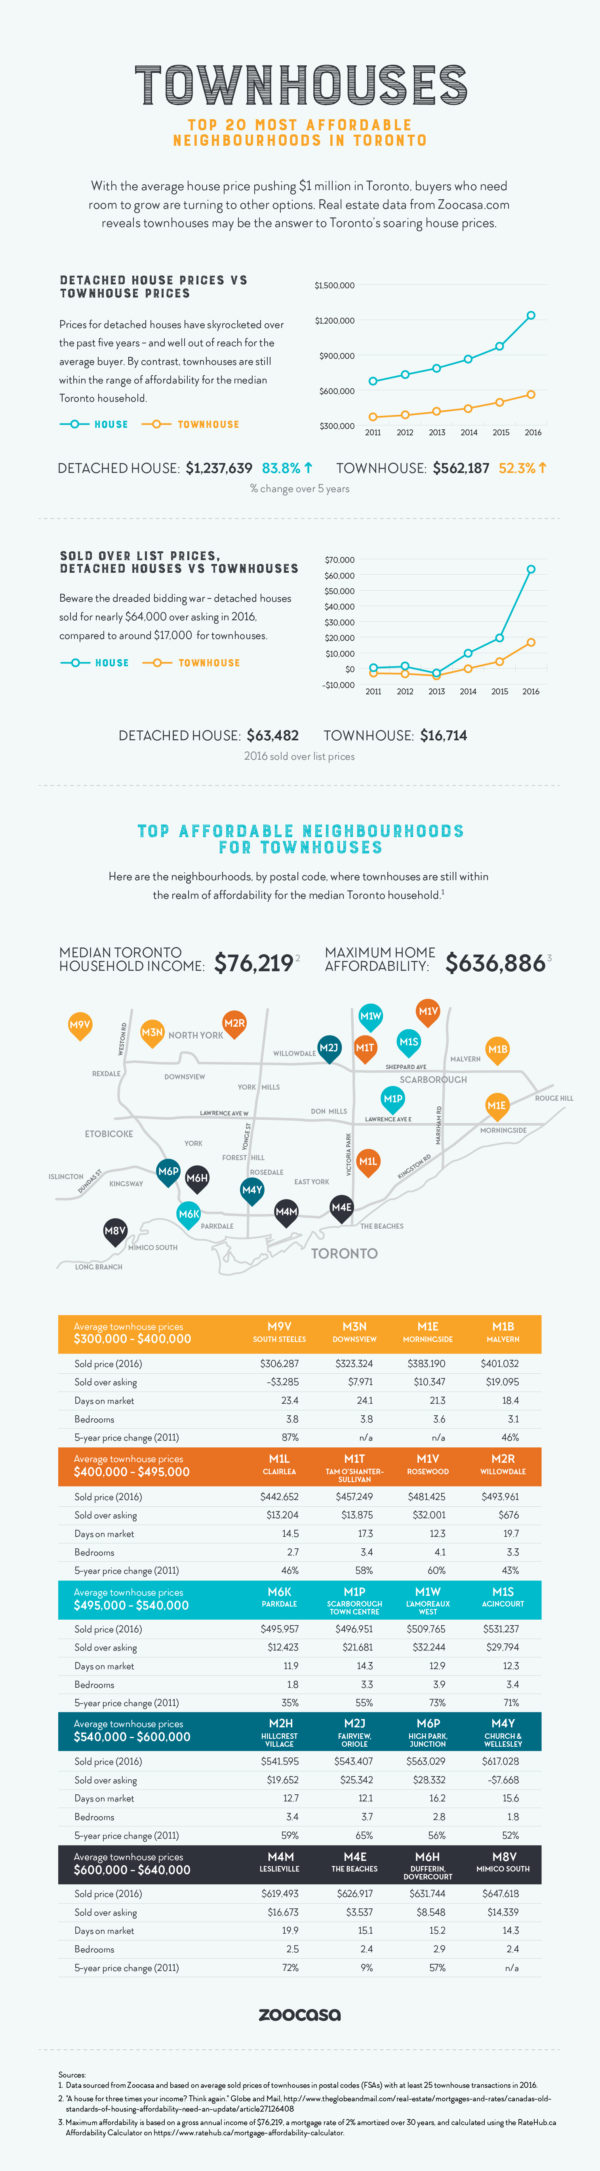 Townhouses: The top 20 affordable neighbourhoods in Toronto